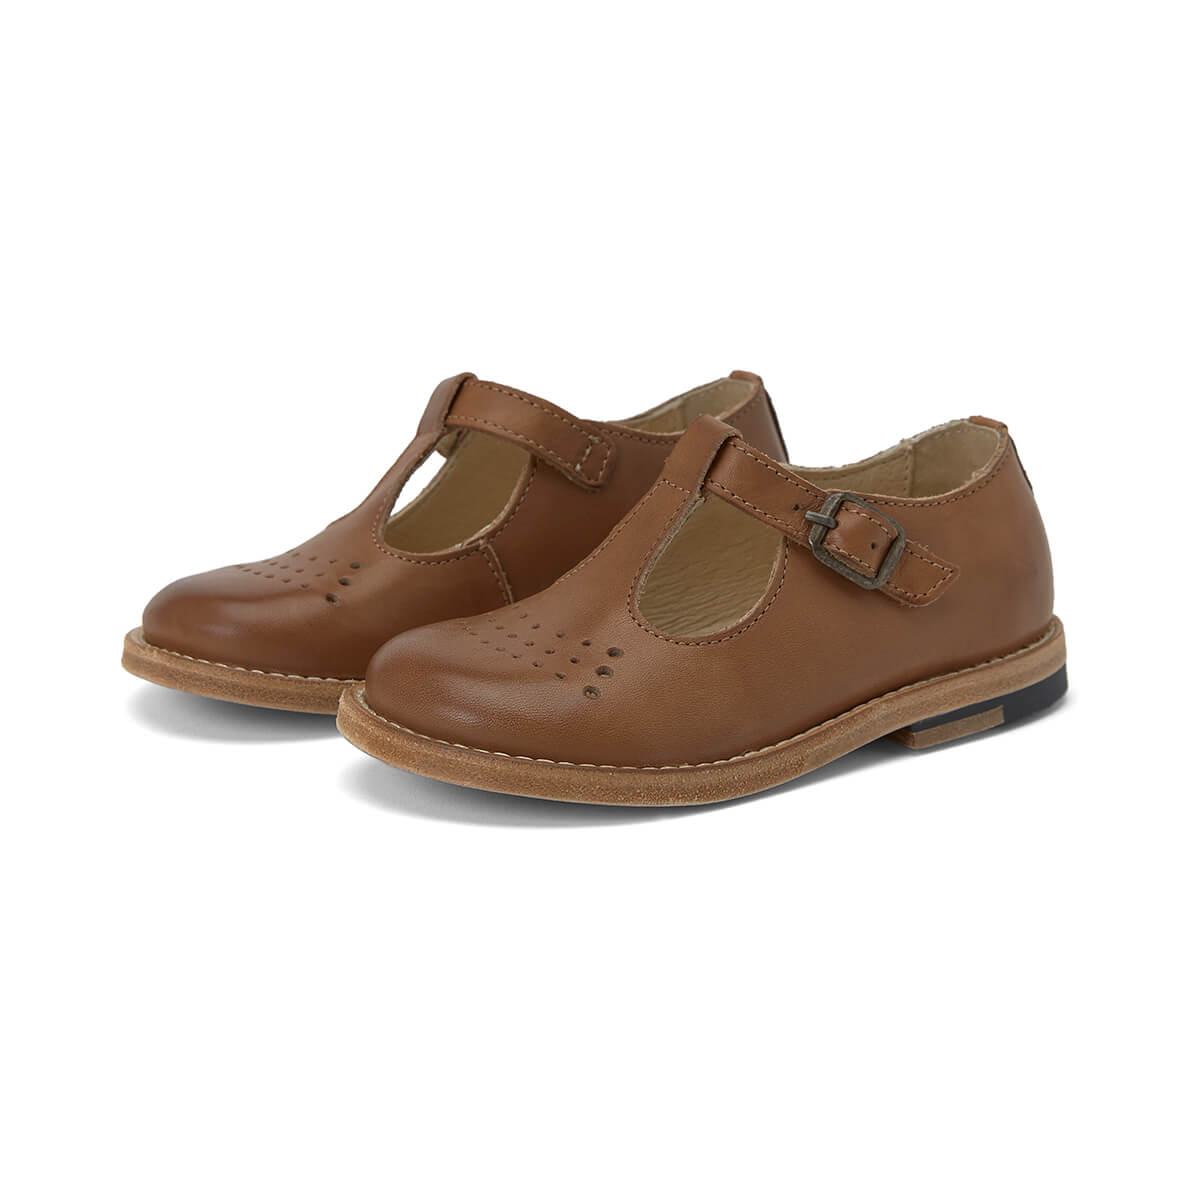 Dottie T-Bar Shoes in Burnished Tan Leather by Young Soles – Junior Edition